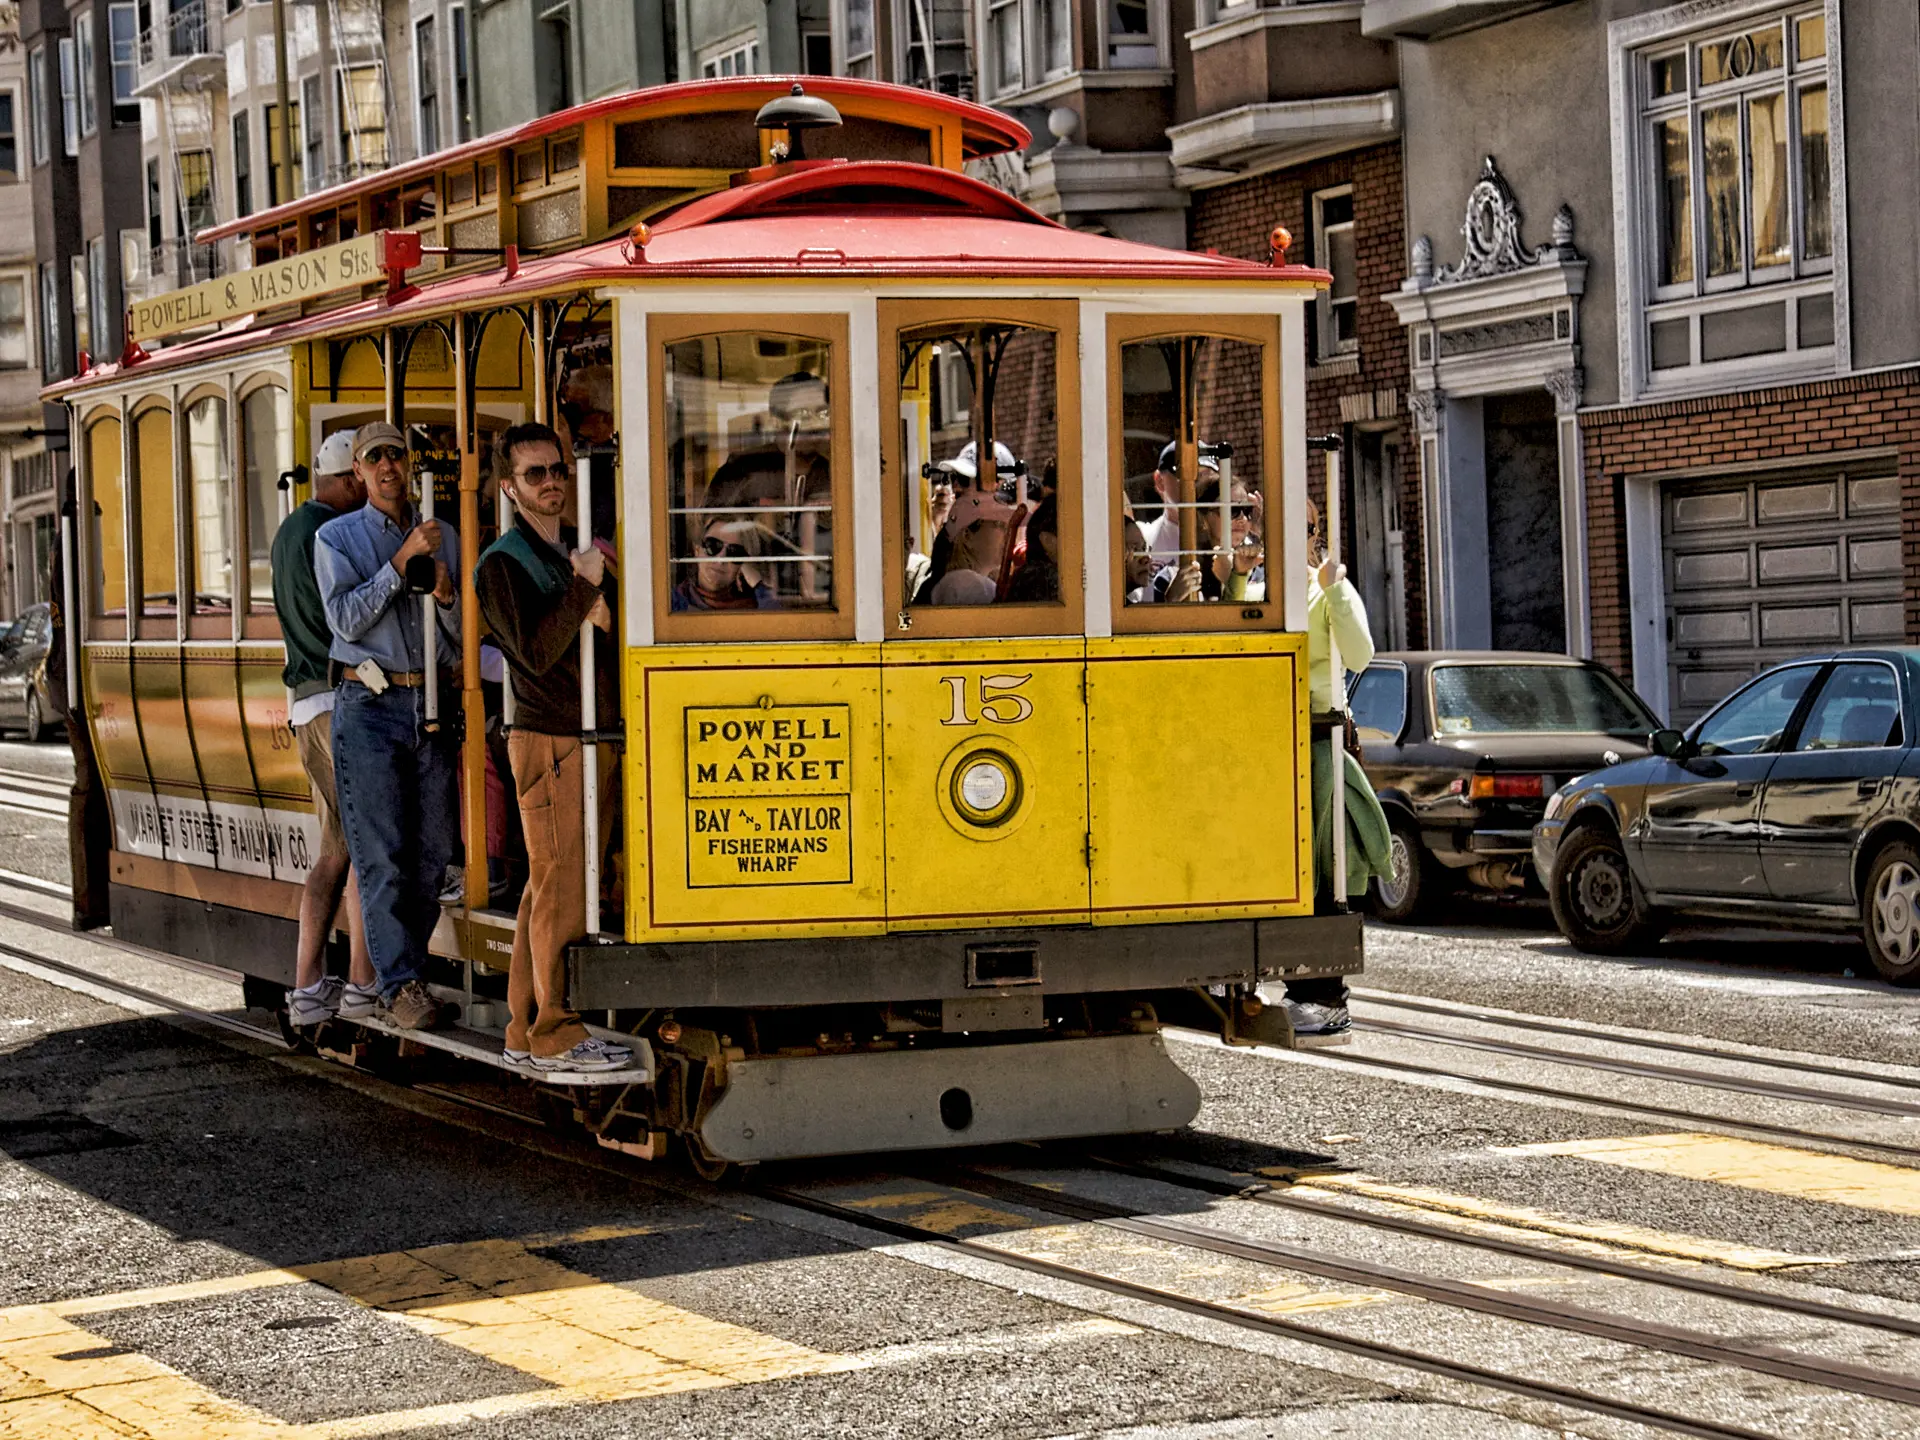 shutterstock_99760811 SAN FRANCISCO Ca. - MAY 6 Passengers ride in a cable car.jpg